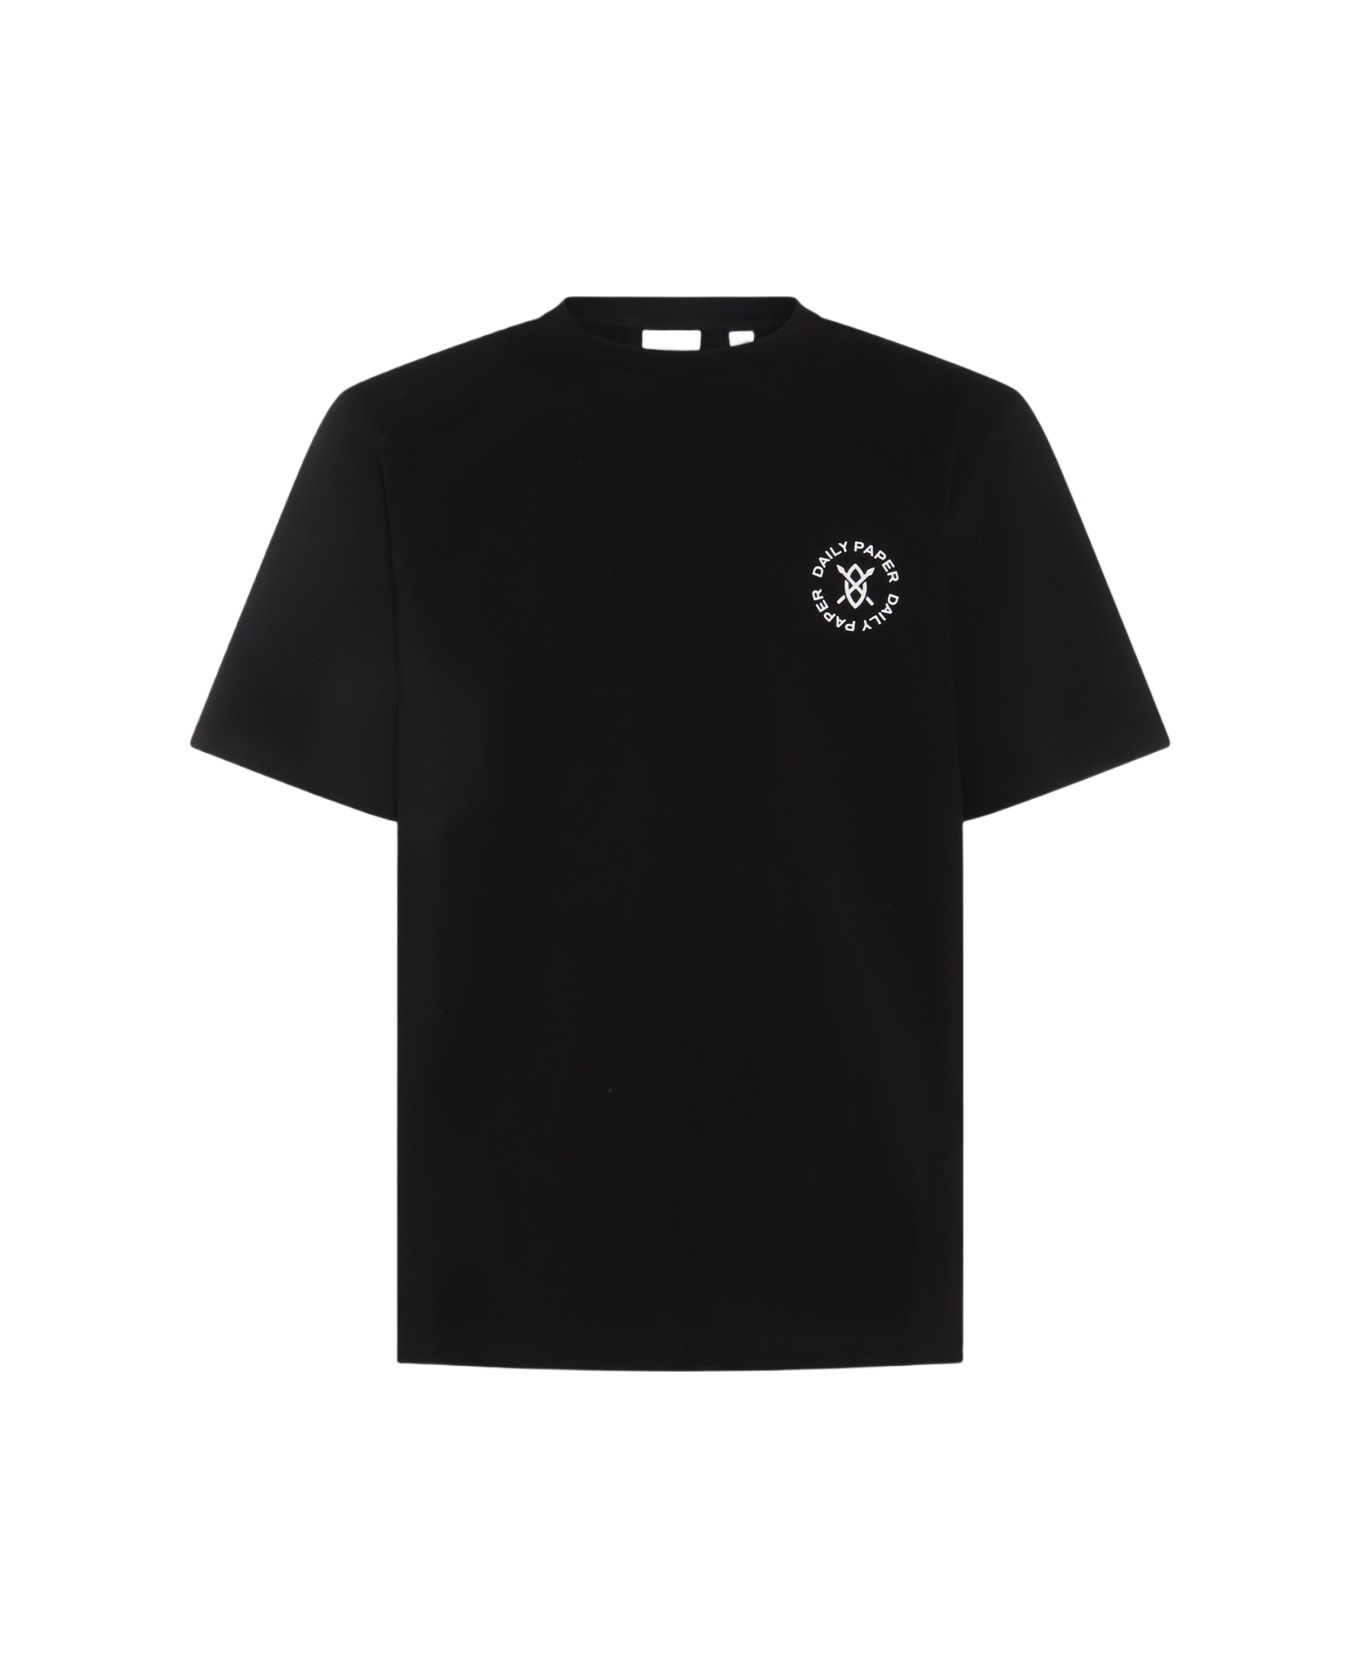 Daily Paper Black And White Cotton T-shirt - Black